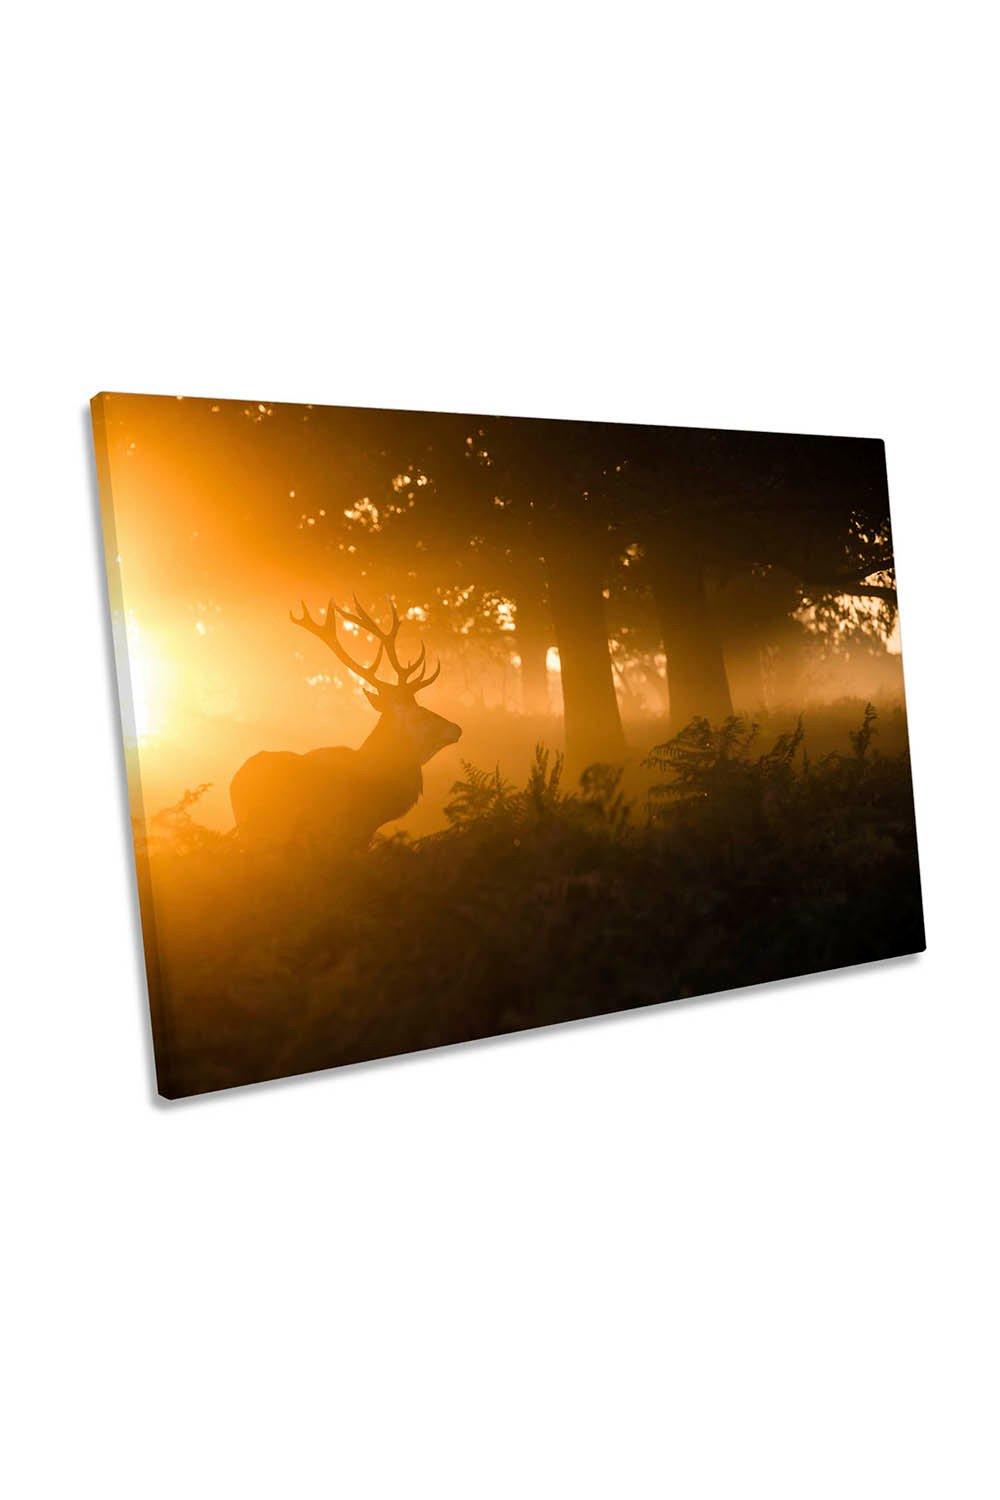 Stag in the Sunset Mist Orange Canvas Wall Art Picture Print